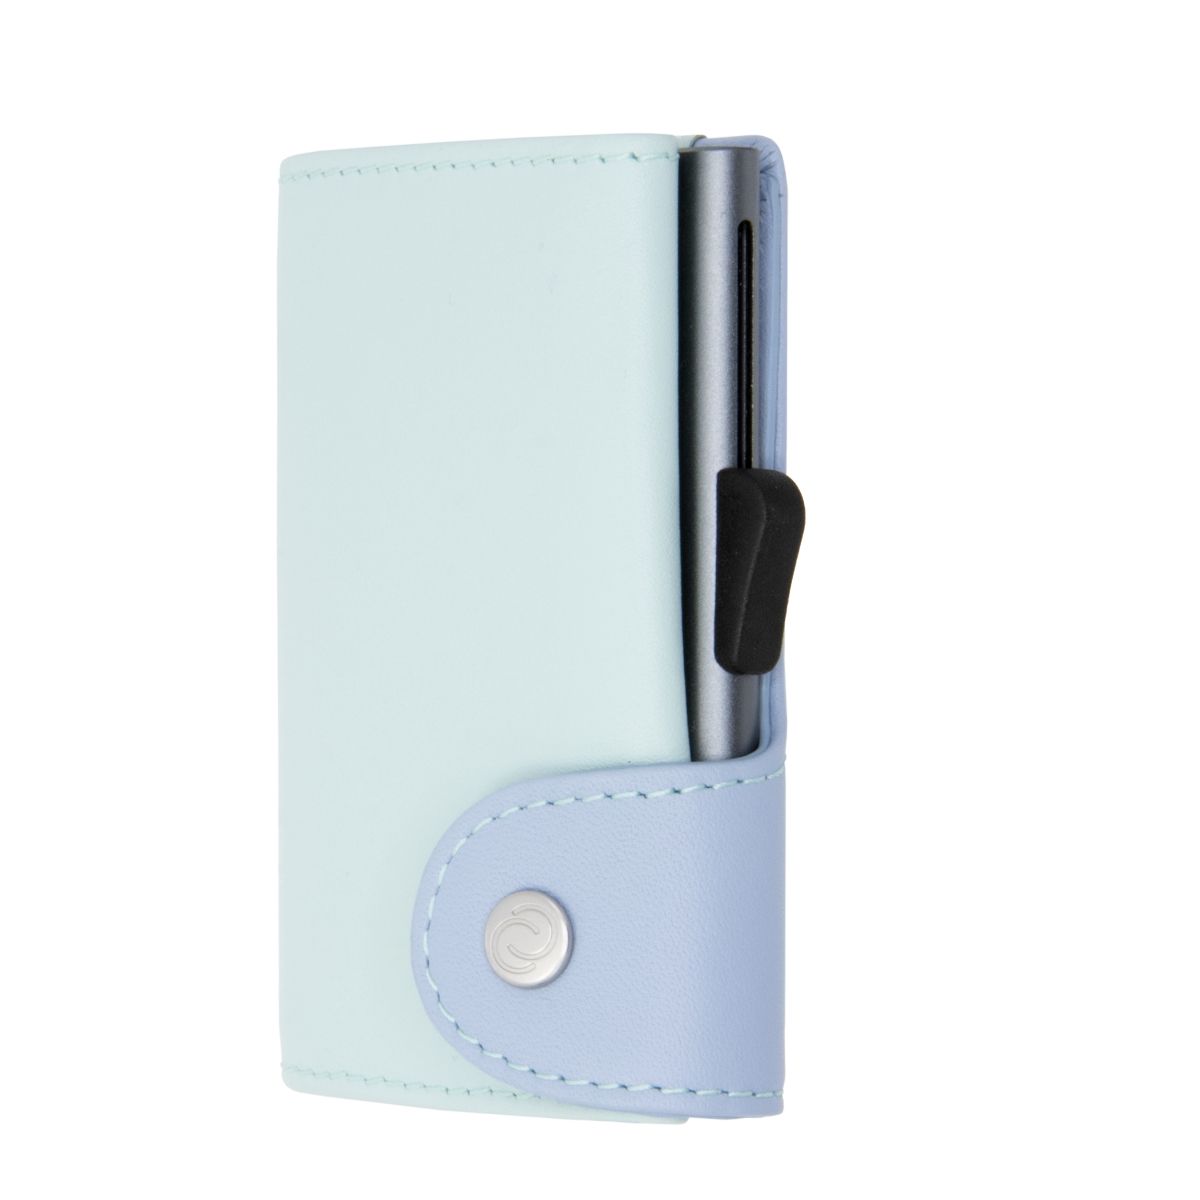 Aluminum Card Holder with Genuine Leather and Coin Pouch - Aqua/Ice